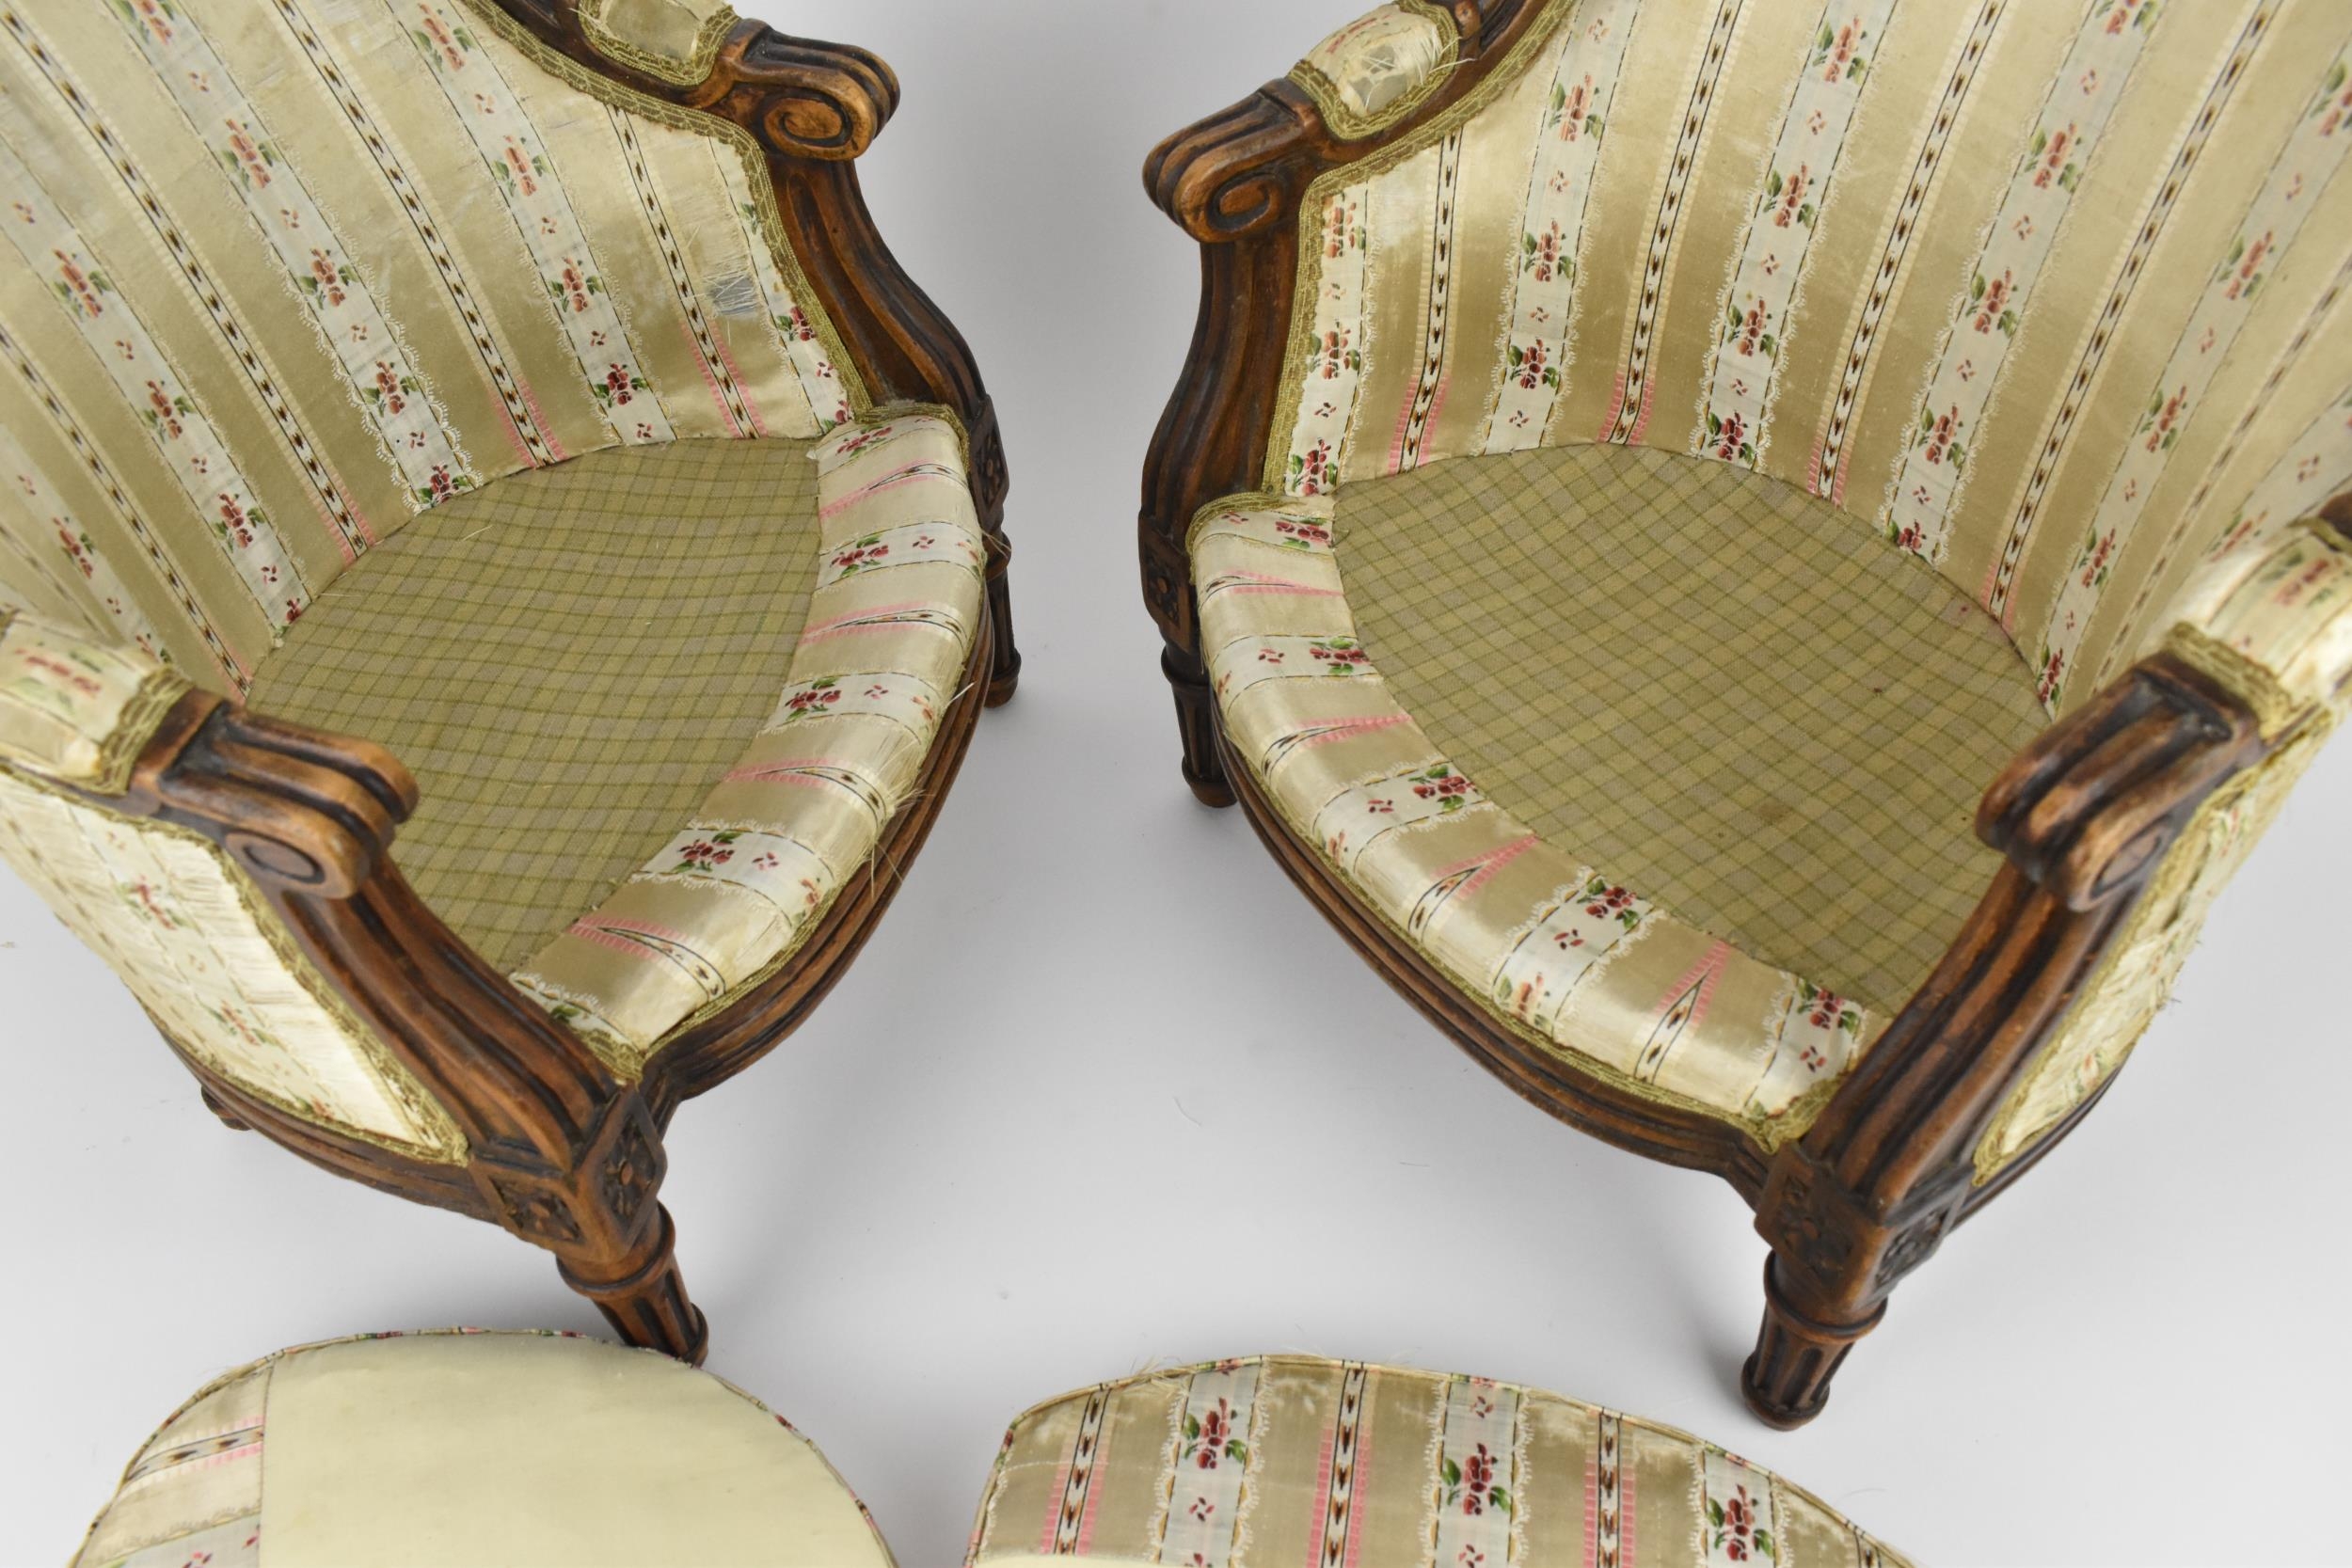 A pair of 18th century French Louis XVI bergère armchairs, circa 1780, with channelled mahogany - Image 6 of 9